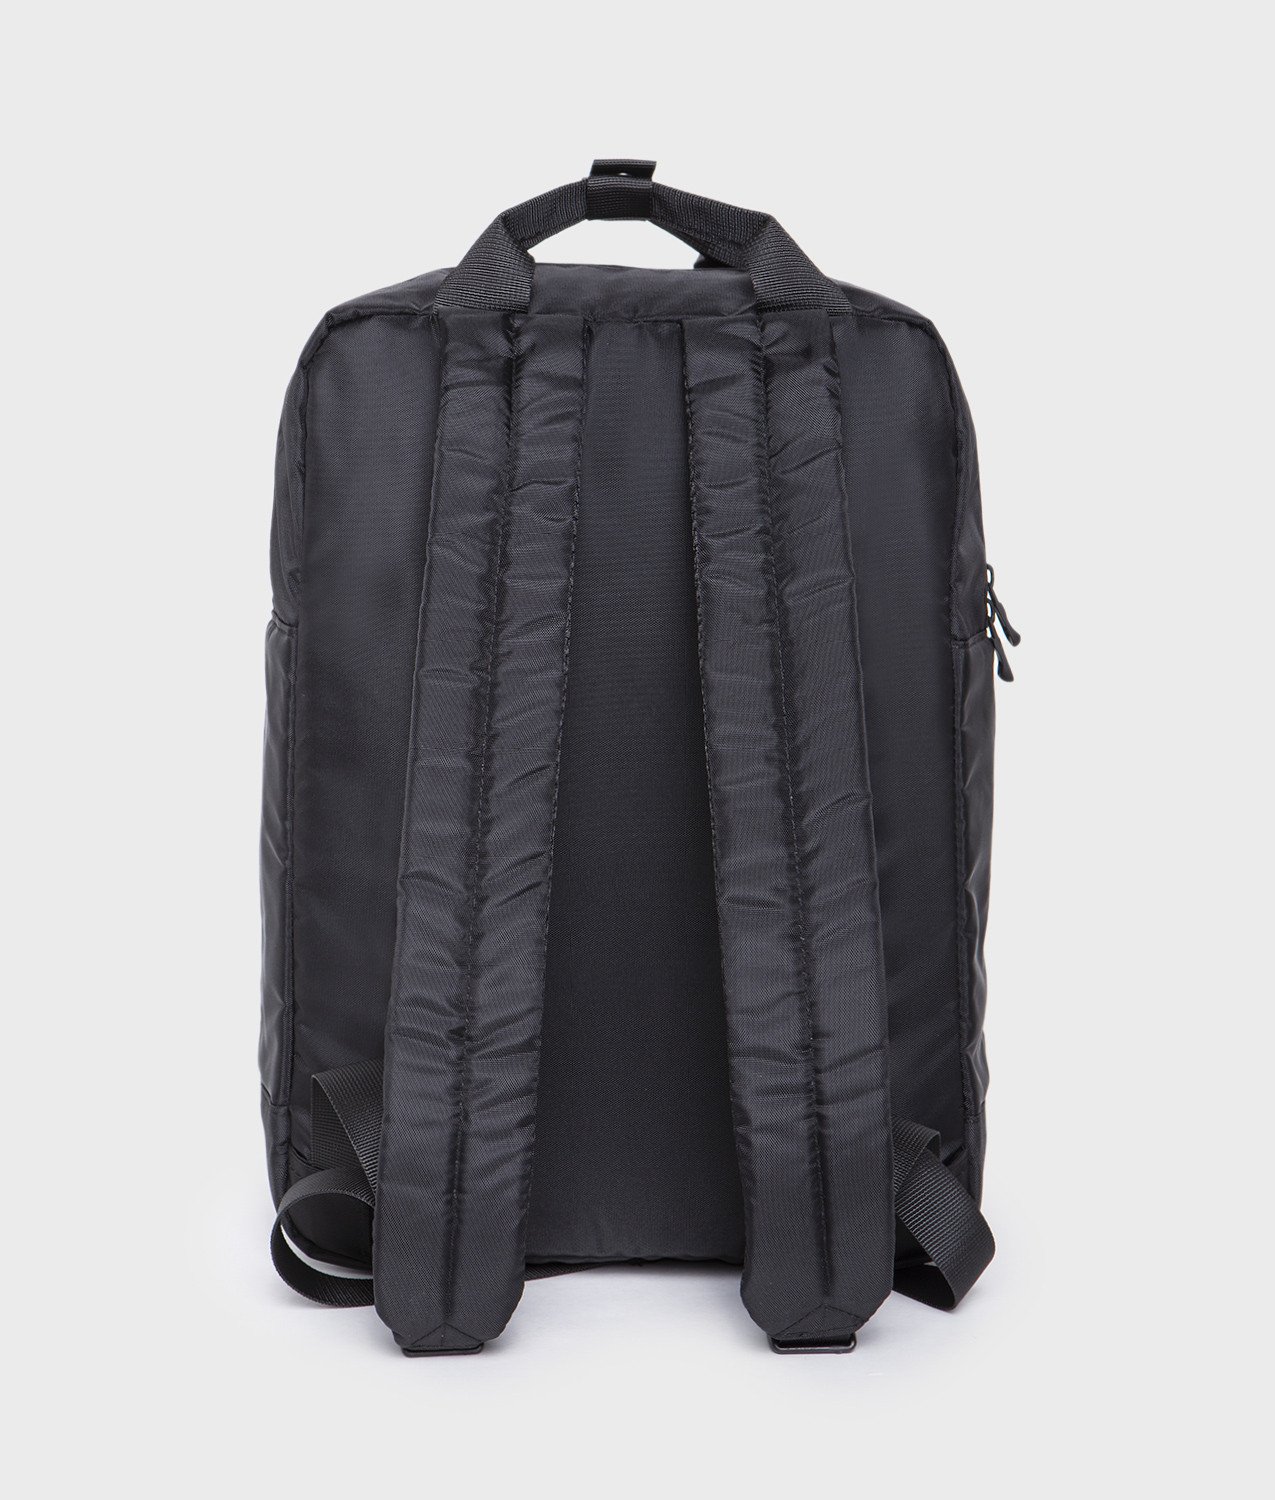 ICON SQUARED BACKPACK